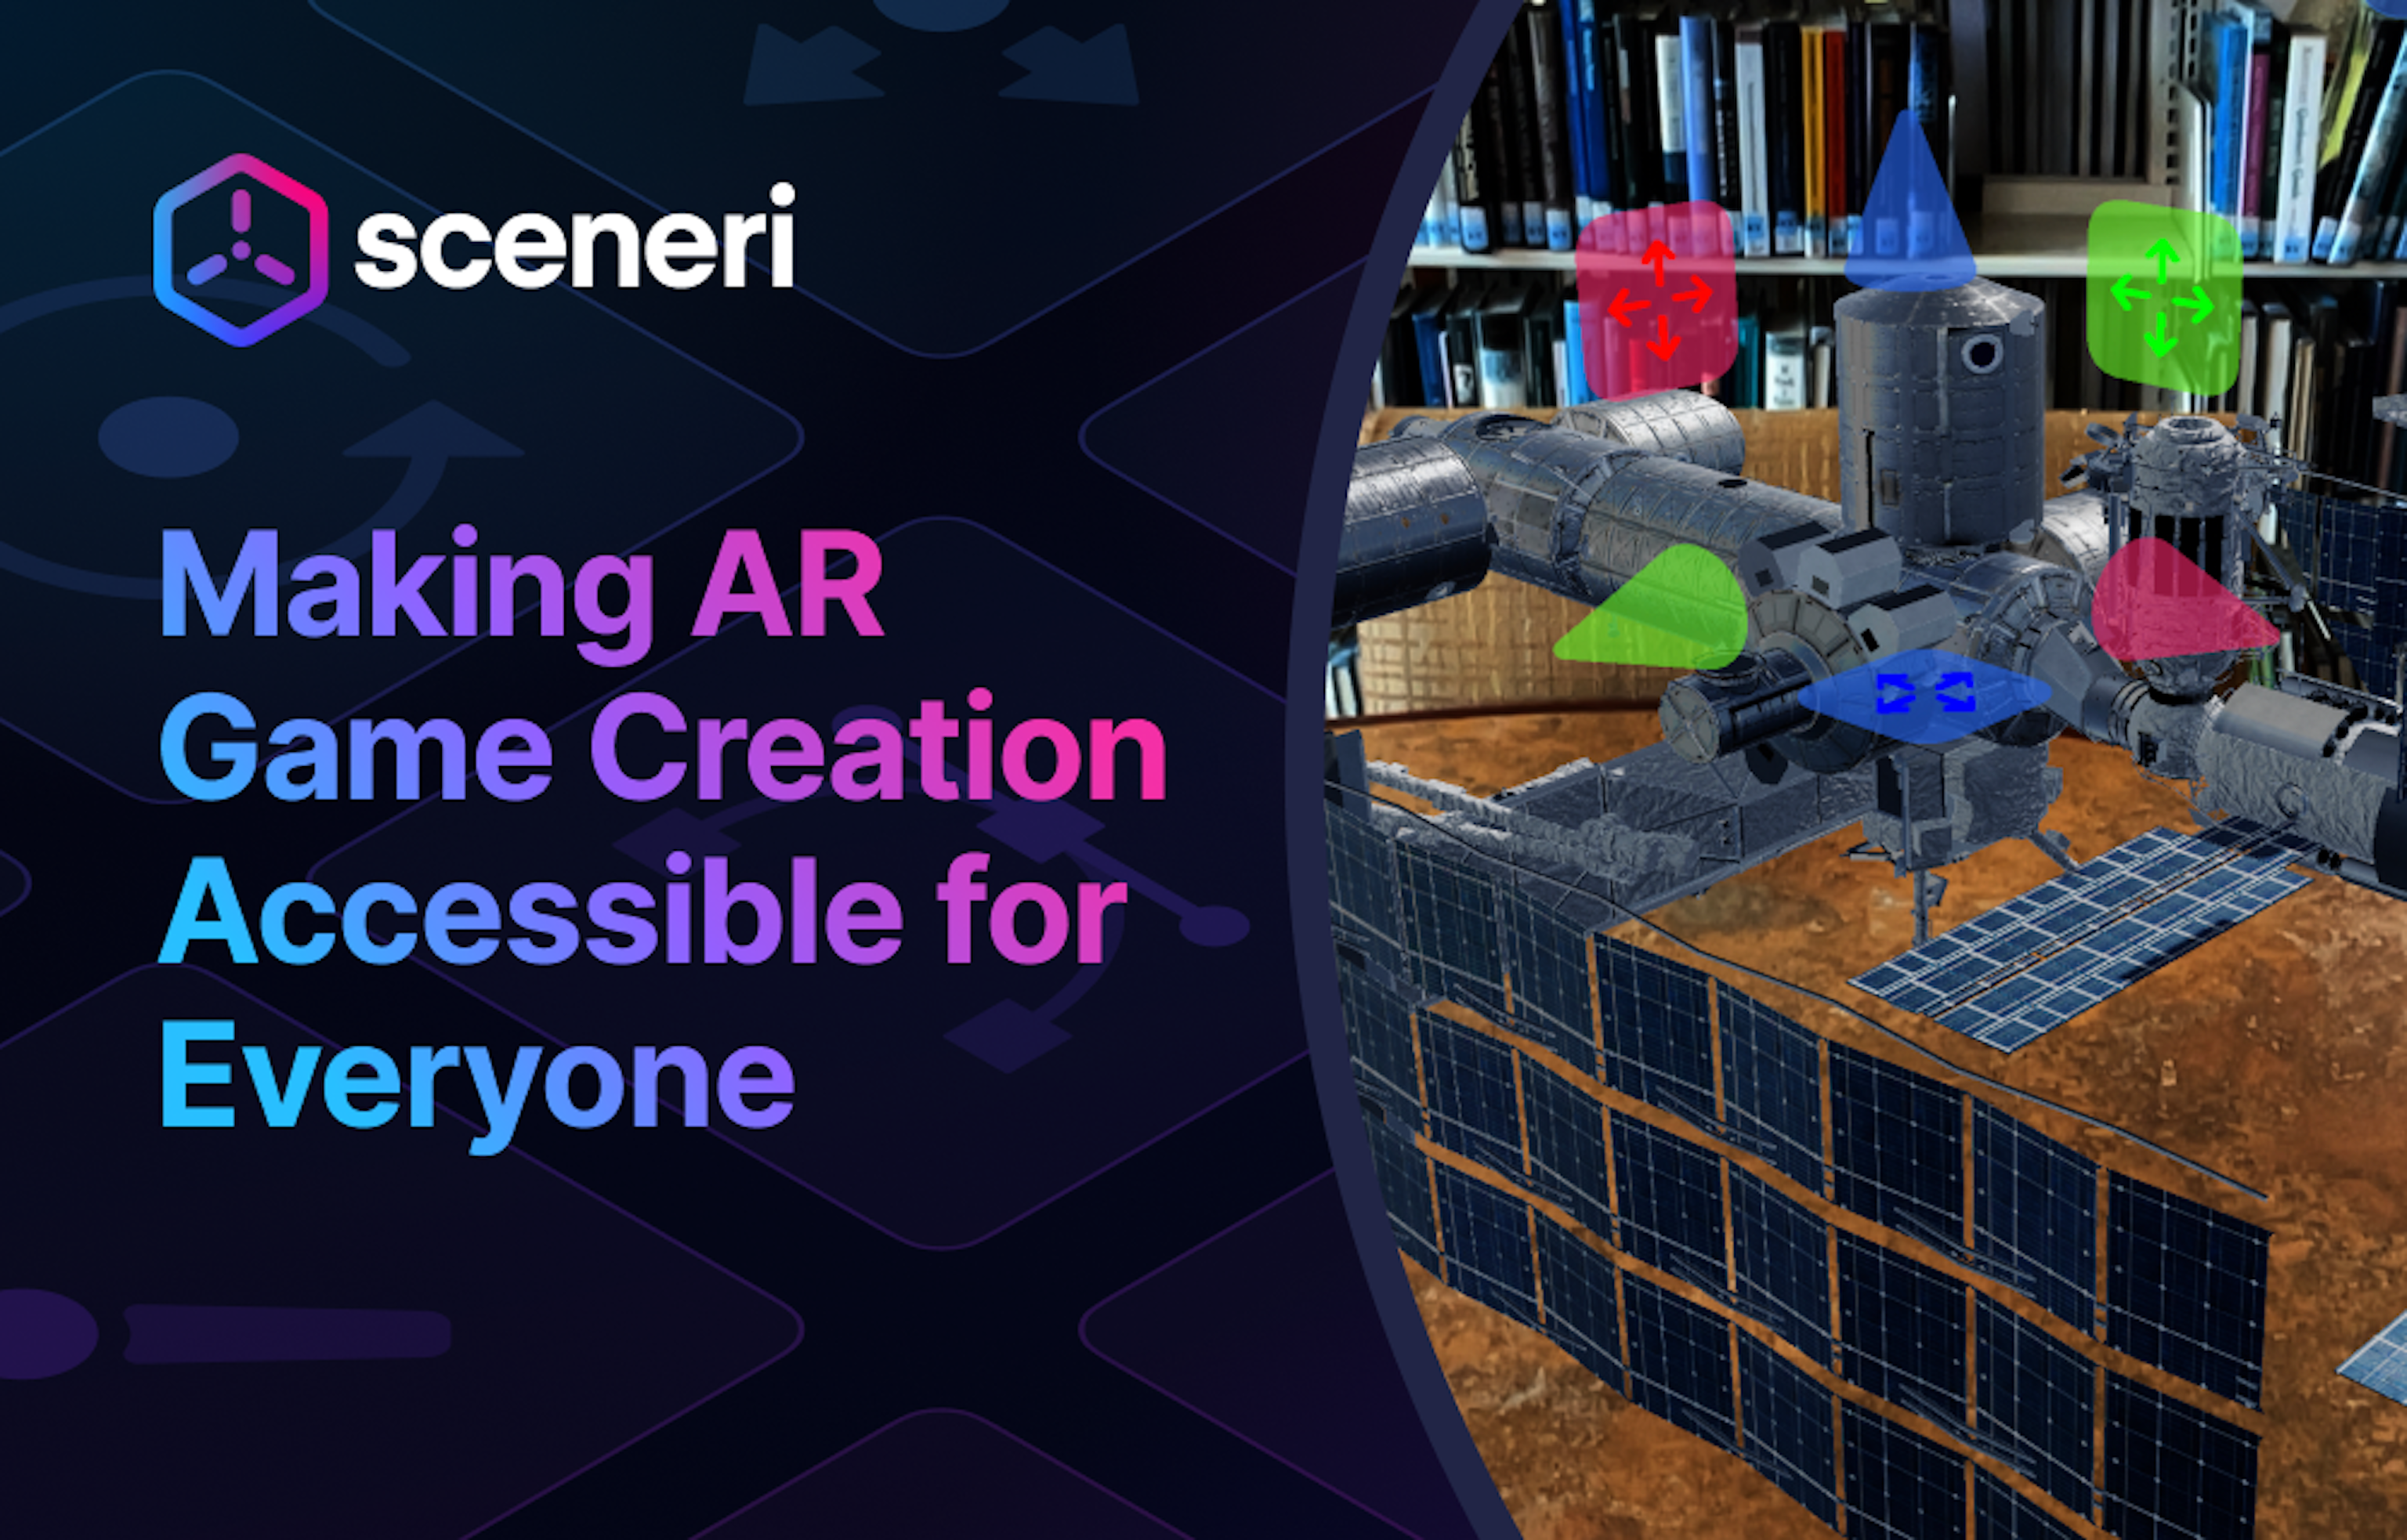 How Sceneri is Bringing AR Game Creation to the Masses